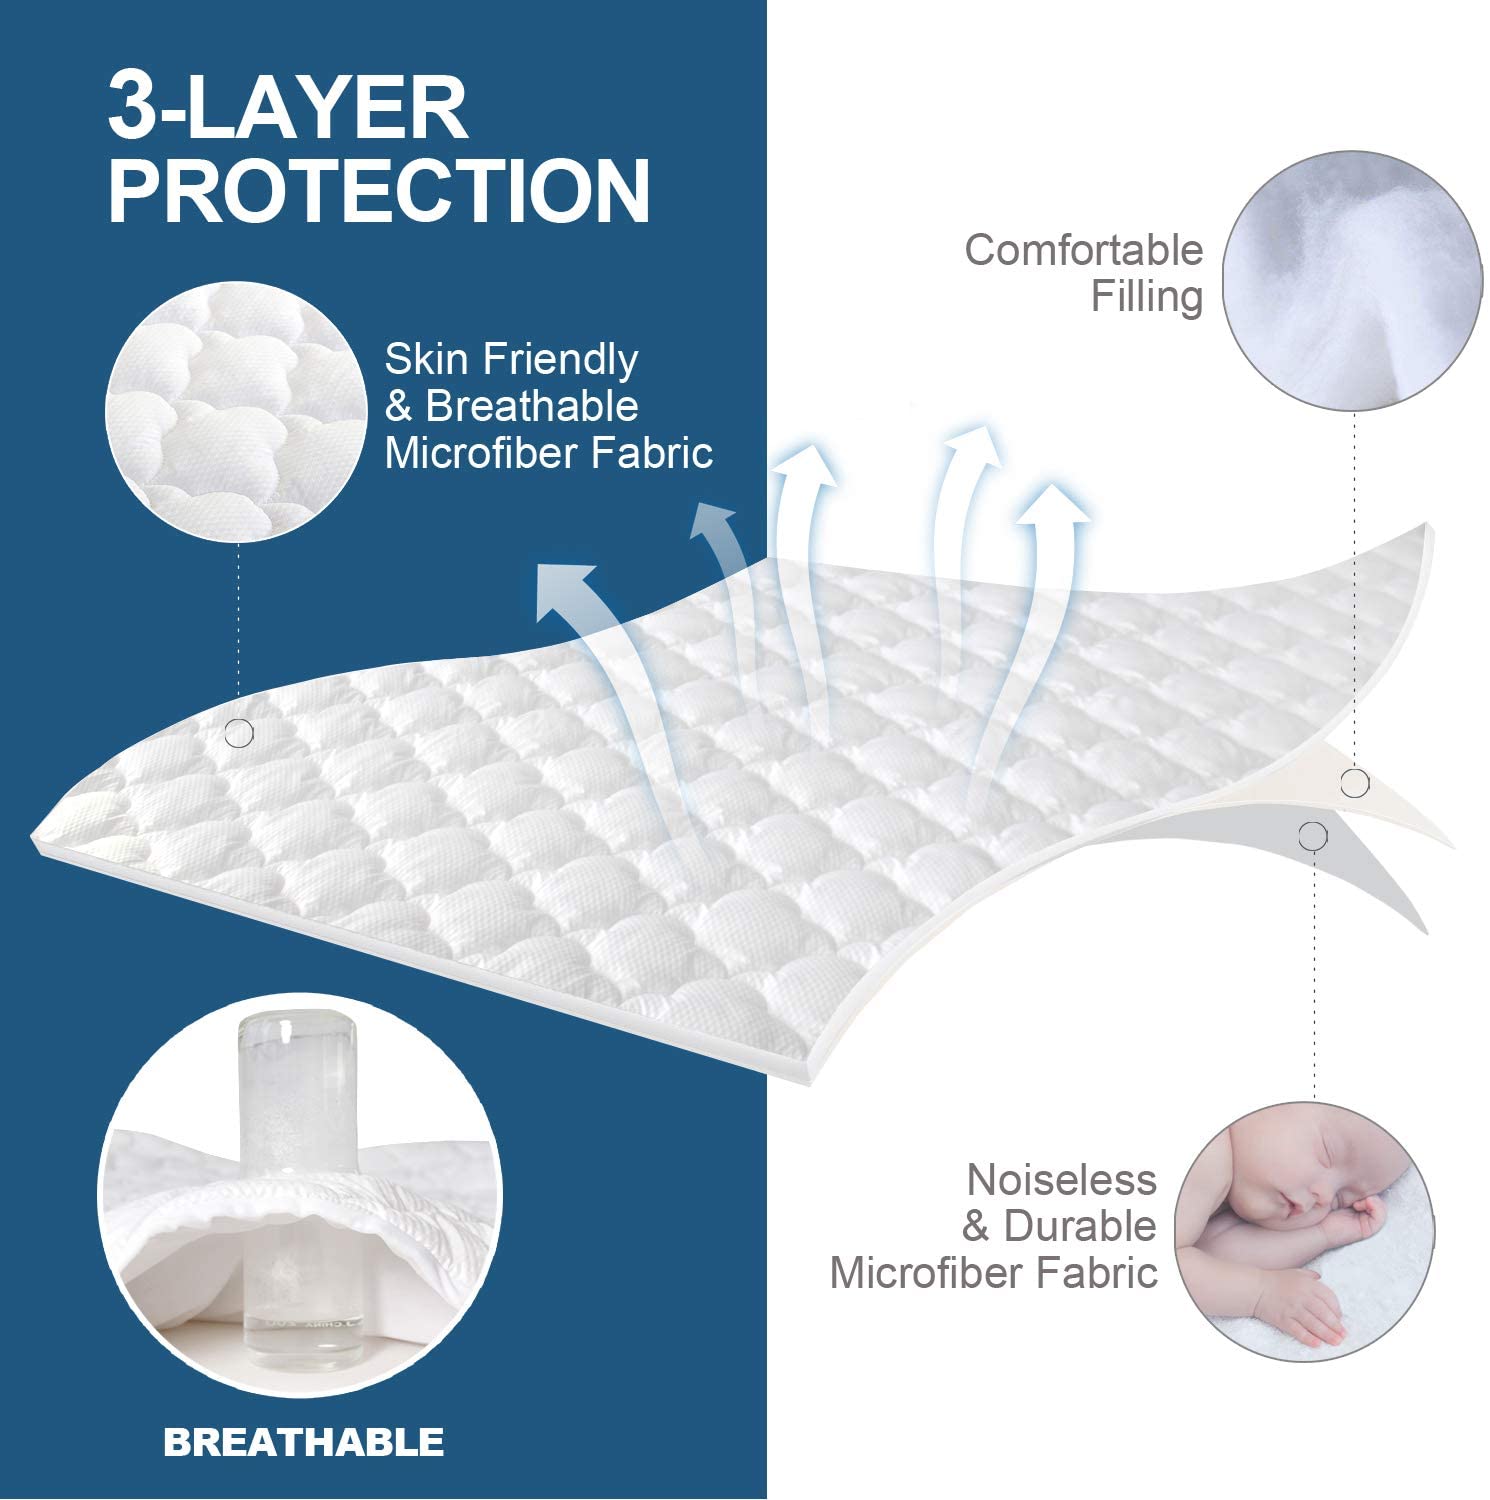 Full Quilted Fitted Waterproof Mattress Pad, Breathable Soft Filling  Mattress Protector, 8-18 Inches Deep Pocket Noiseless Mattress Cover (White)